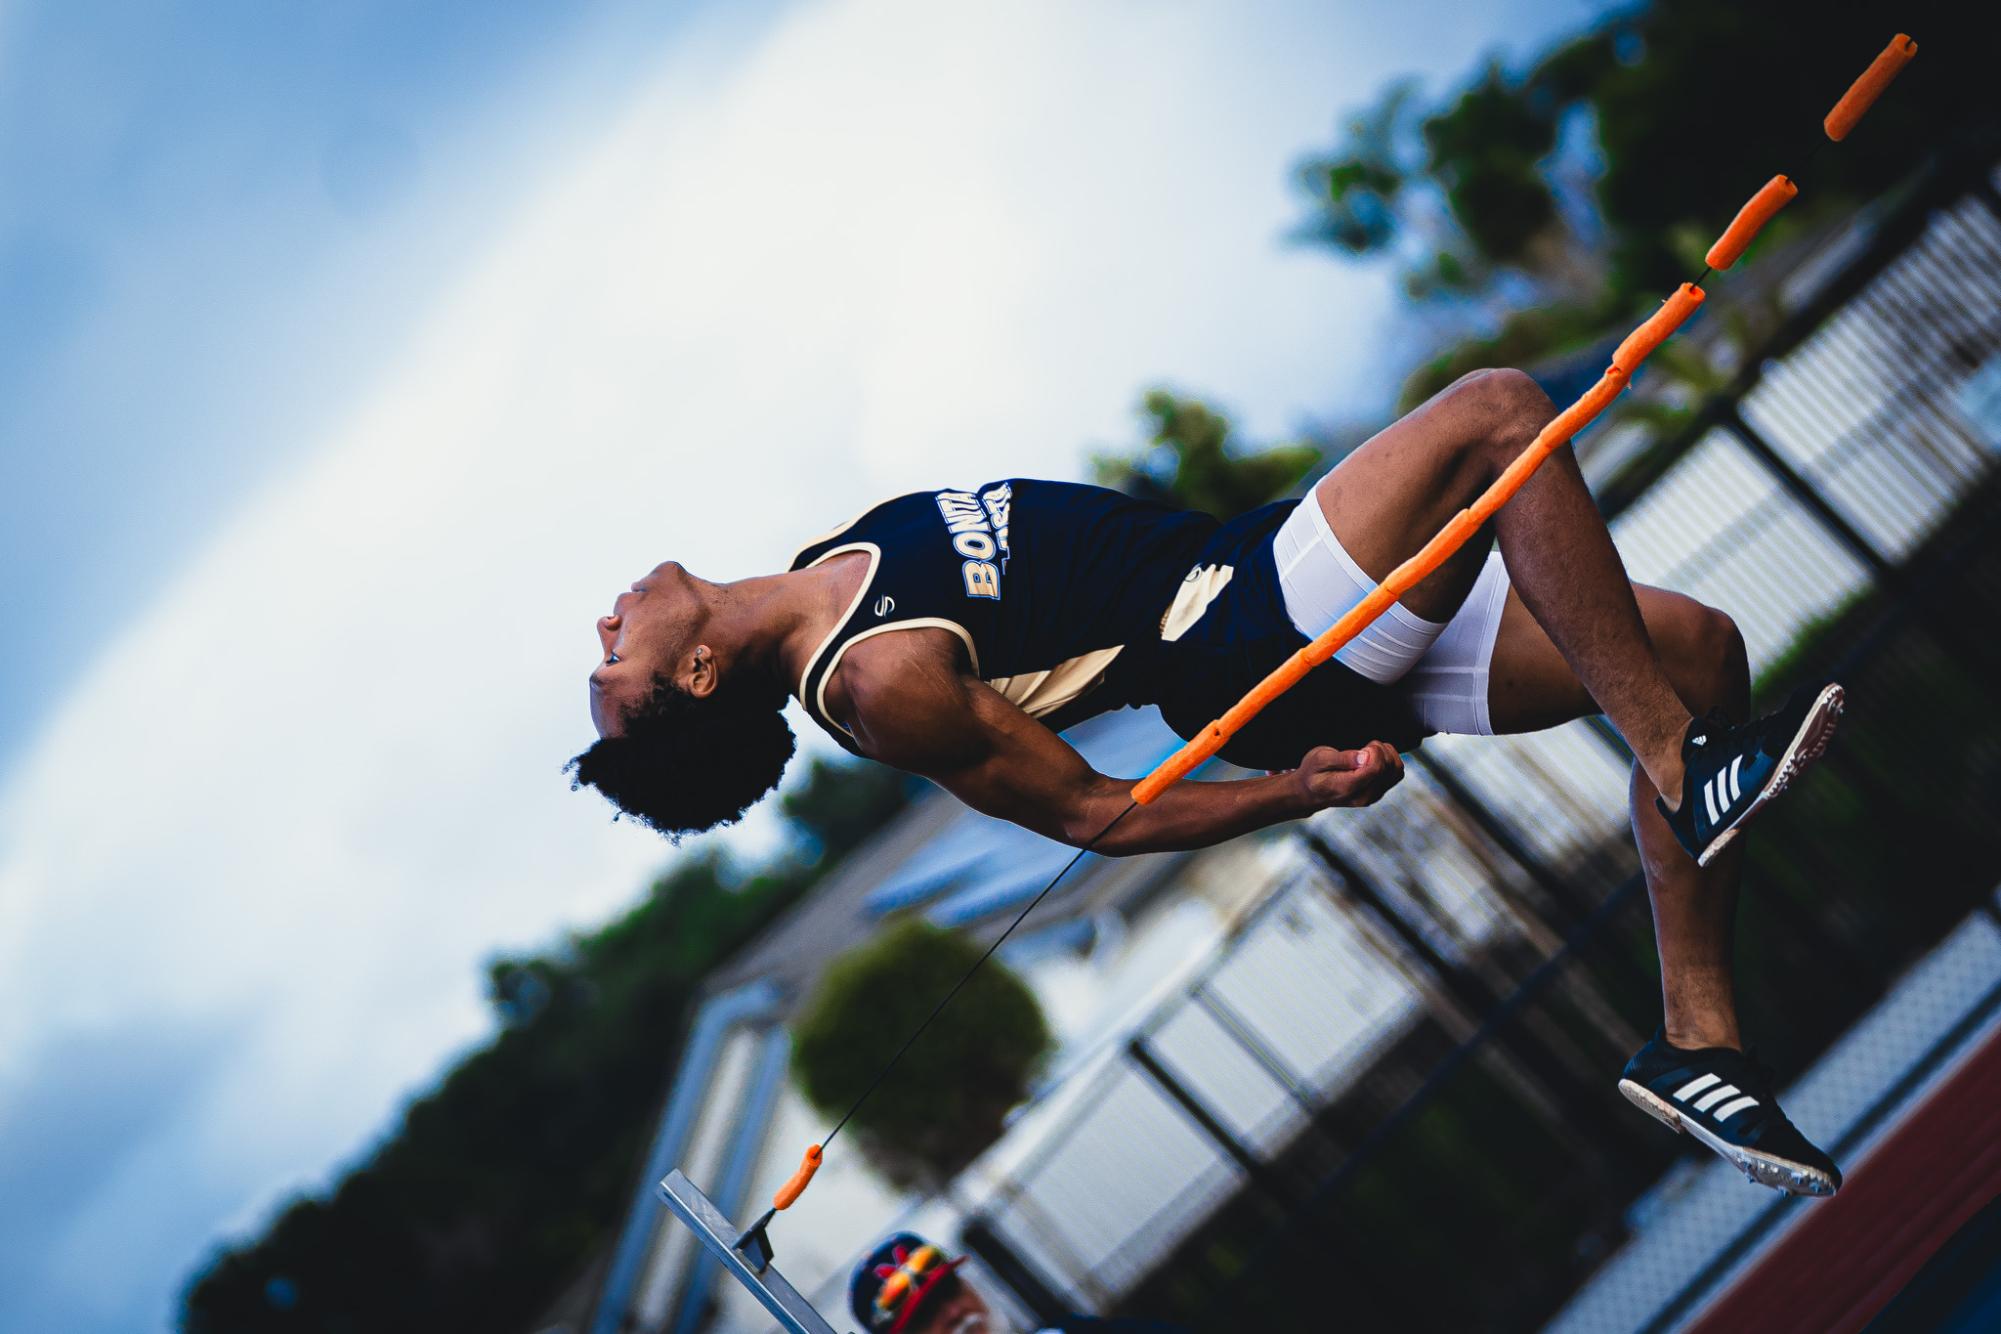 BVH track and field athlete Dakarrai Roberson excelling in sports and performing arts